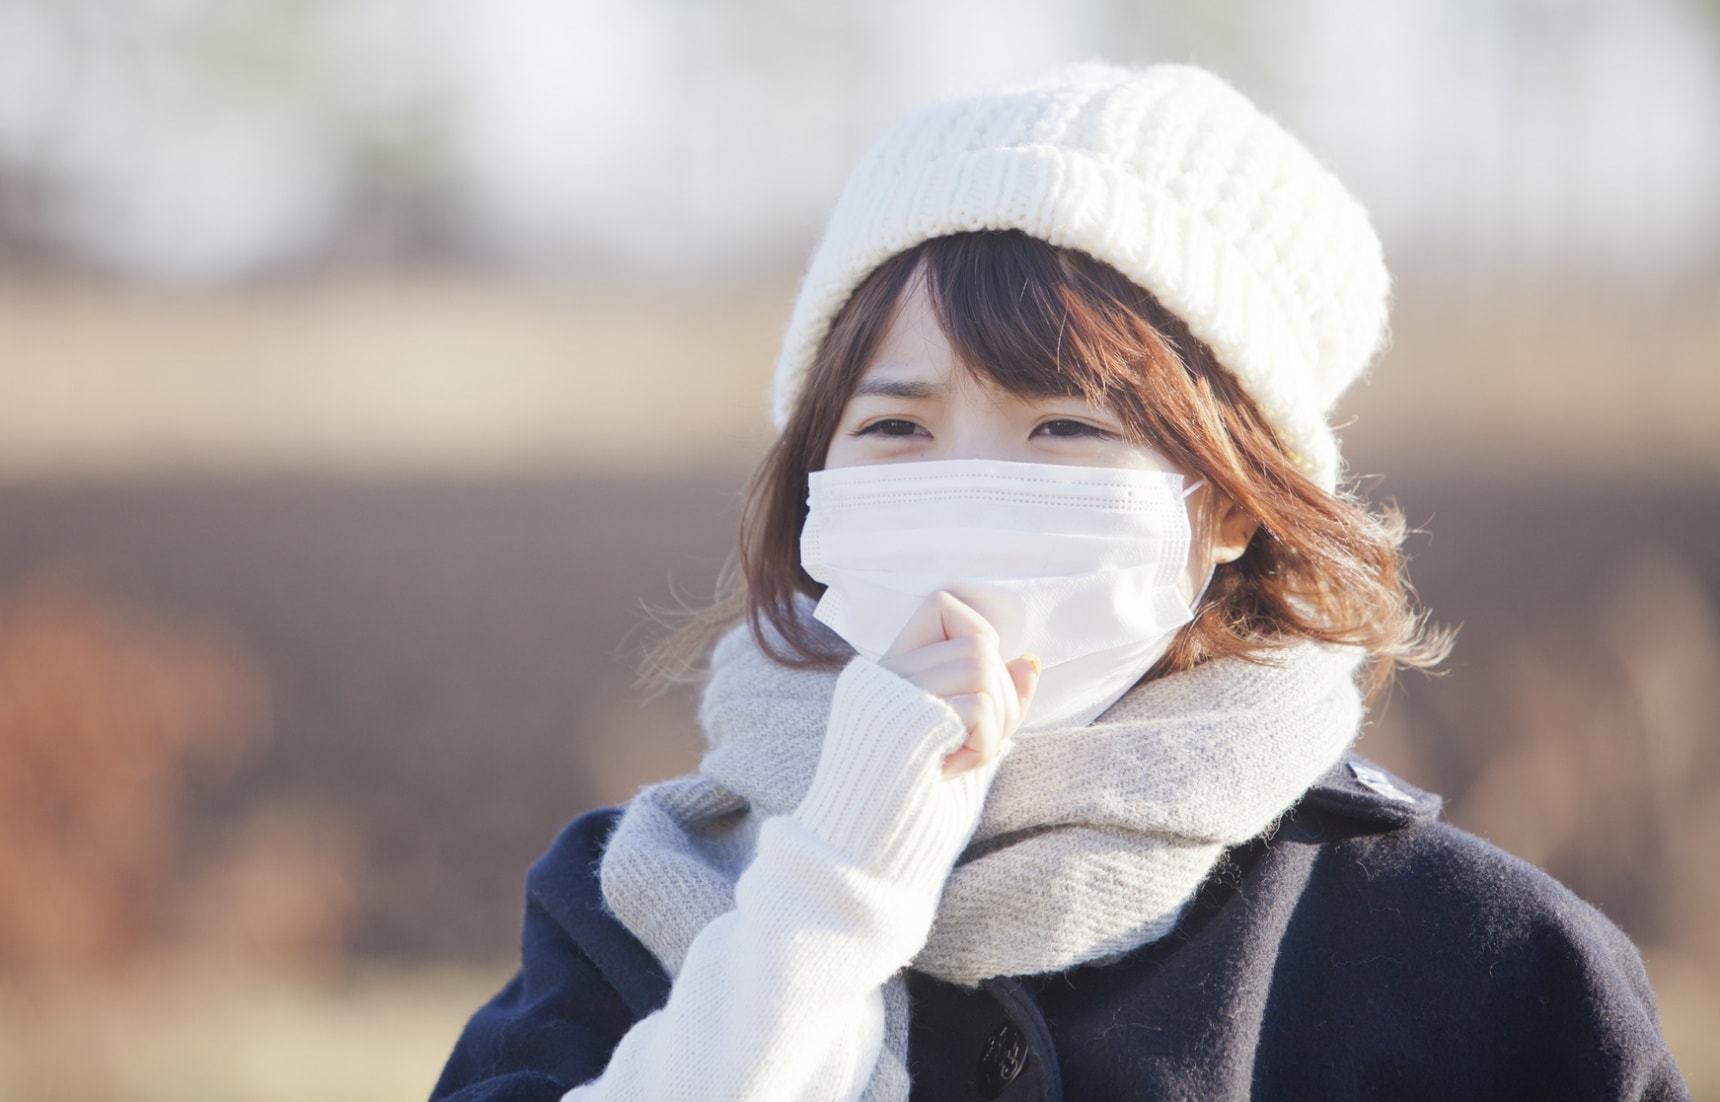 What are the most popular medications for the common cold?